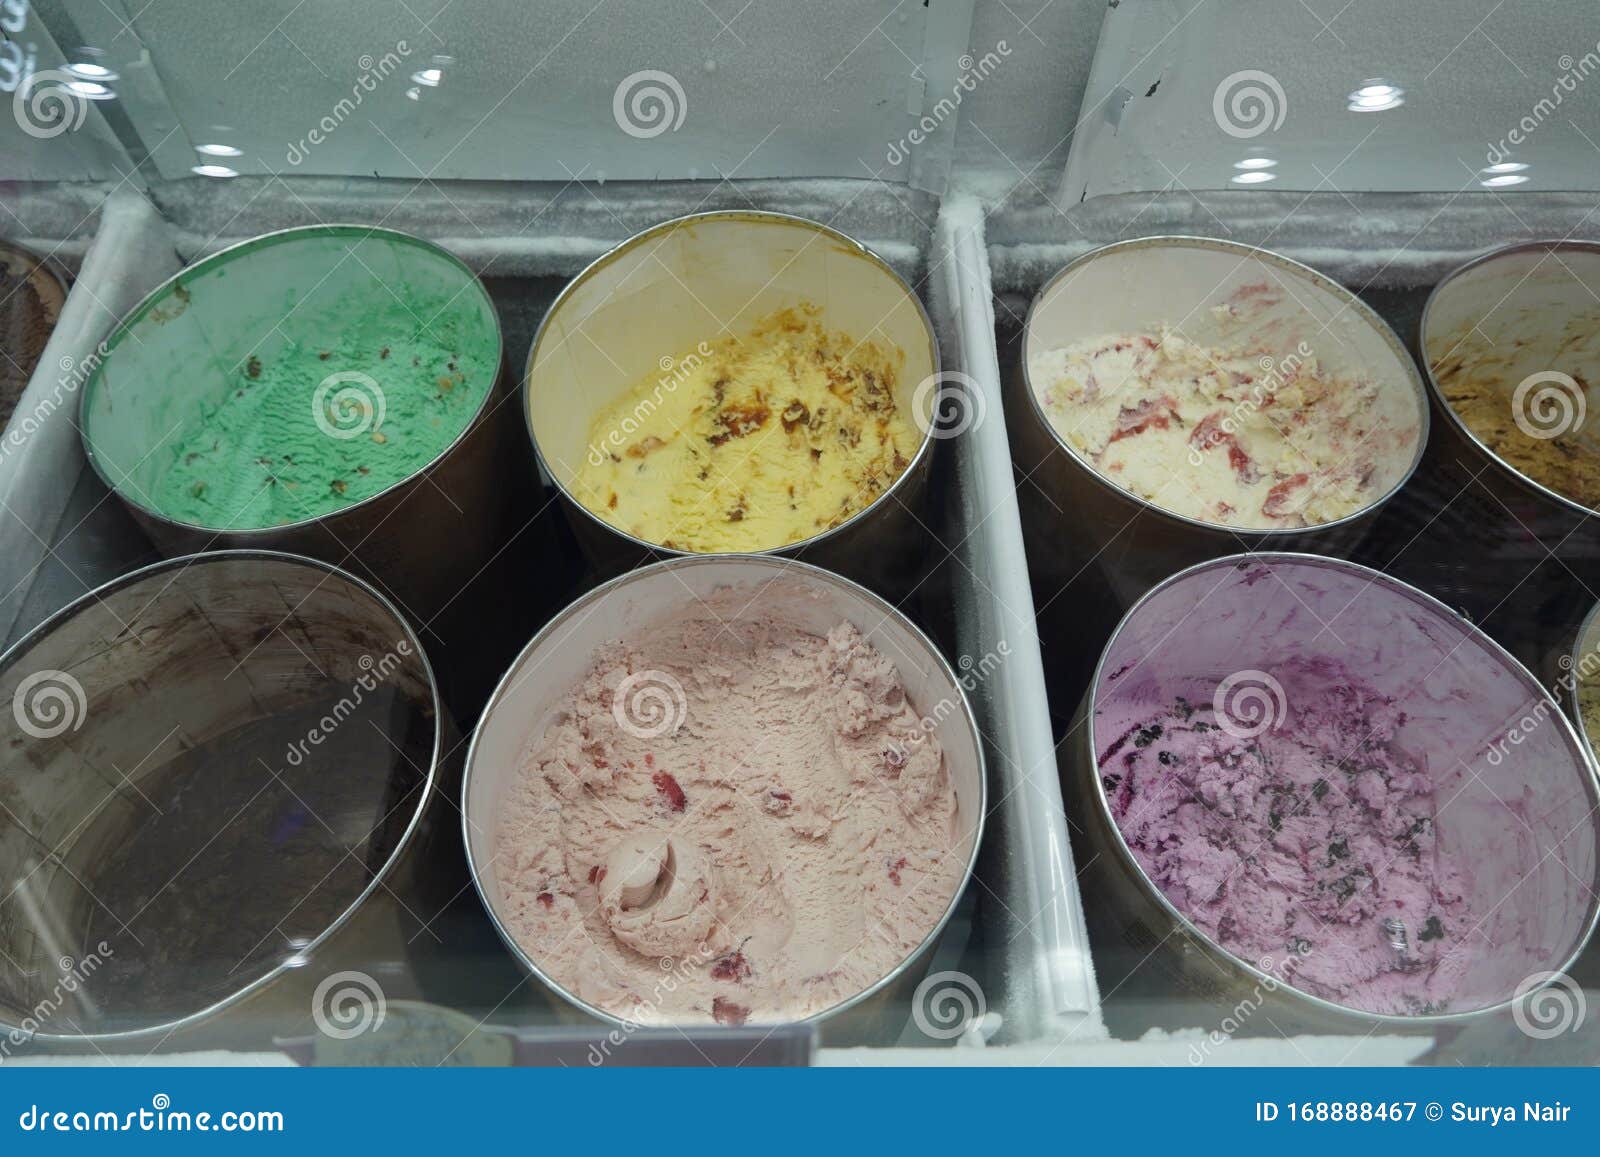 Bulk Ice Cream Kept in Large Round Containers Behind Glass at